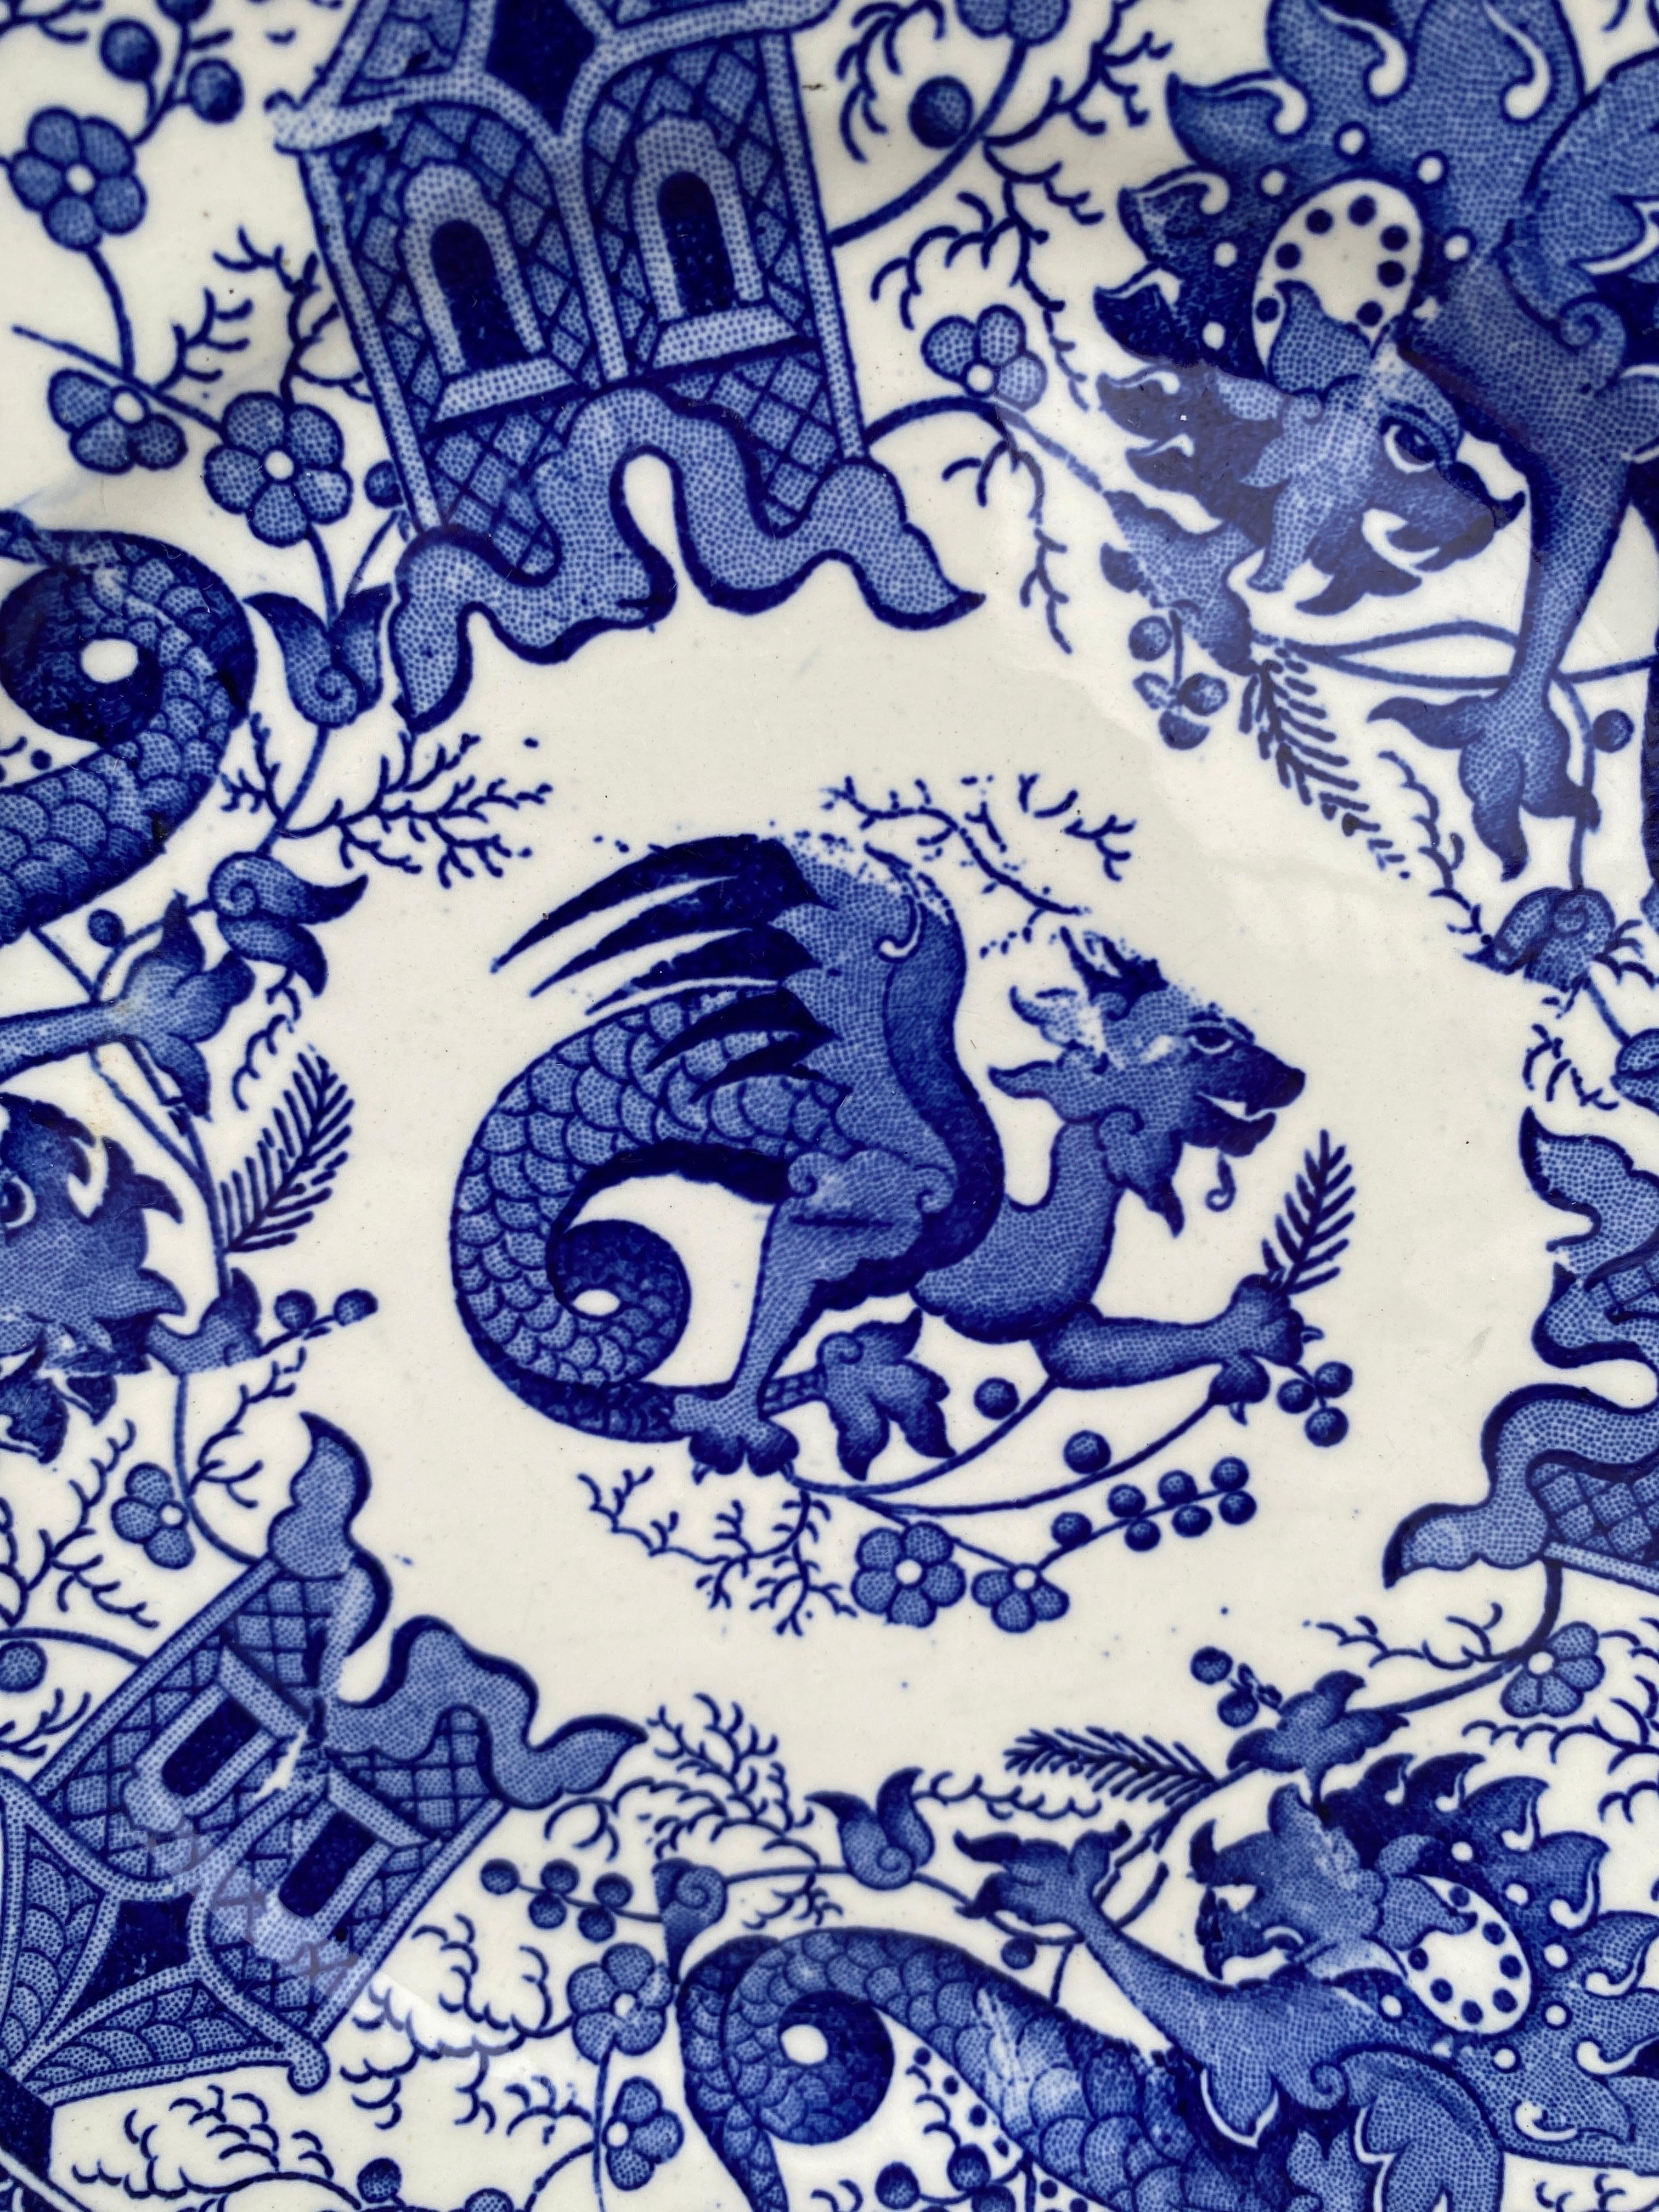 French 19th Century Blue & White Dessert Plate Dragon signed Sarreguemines.
Transferware.
Asian decor with dragons.
7.8 inches diameter.
5 plates available.